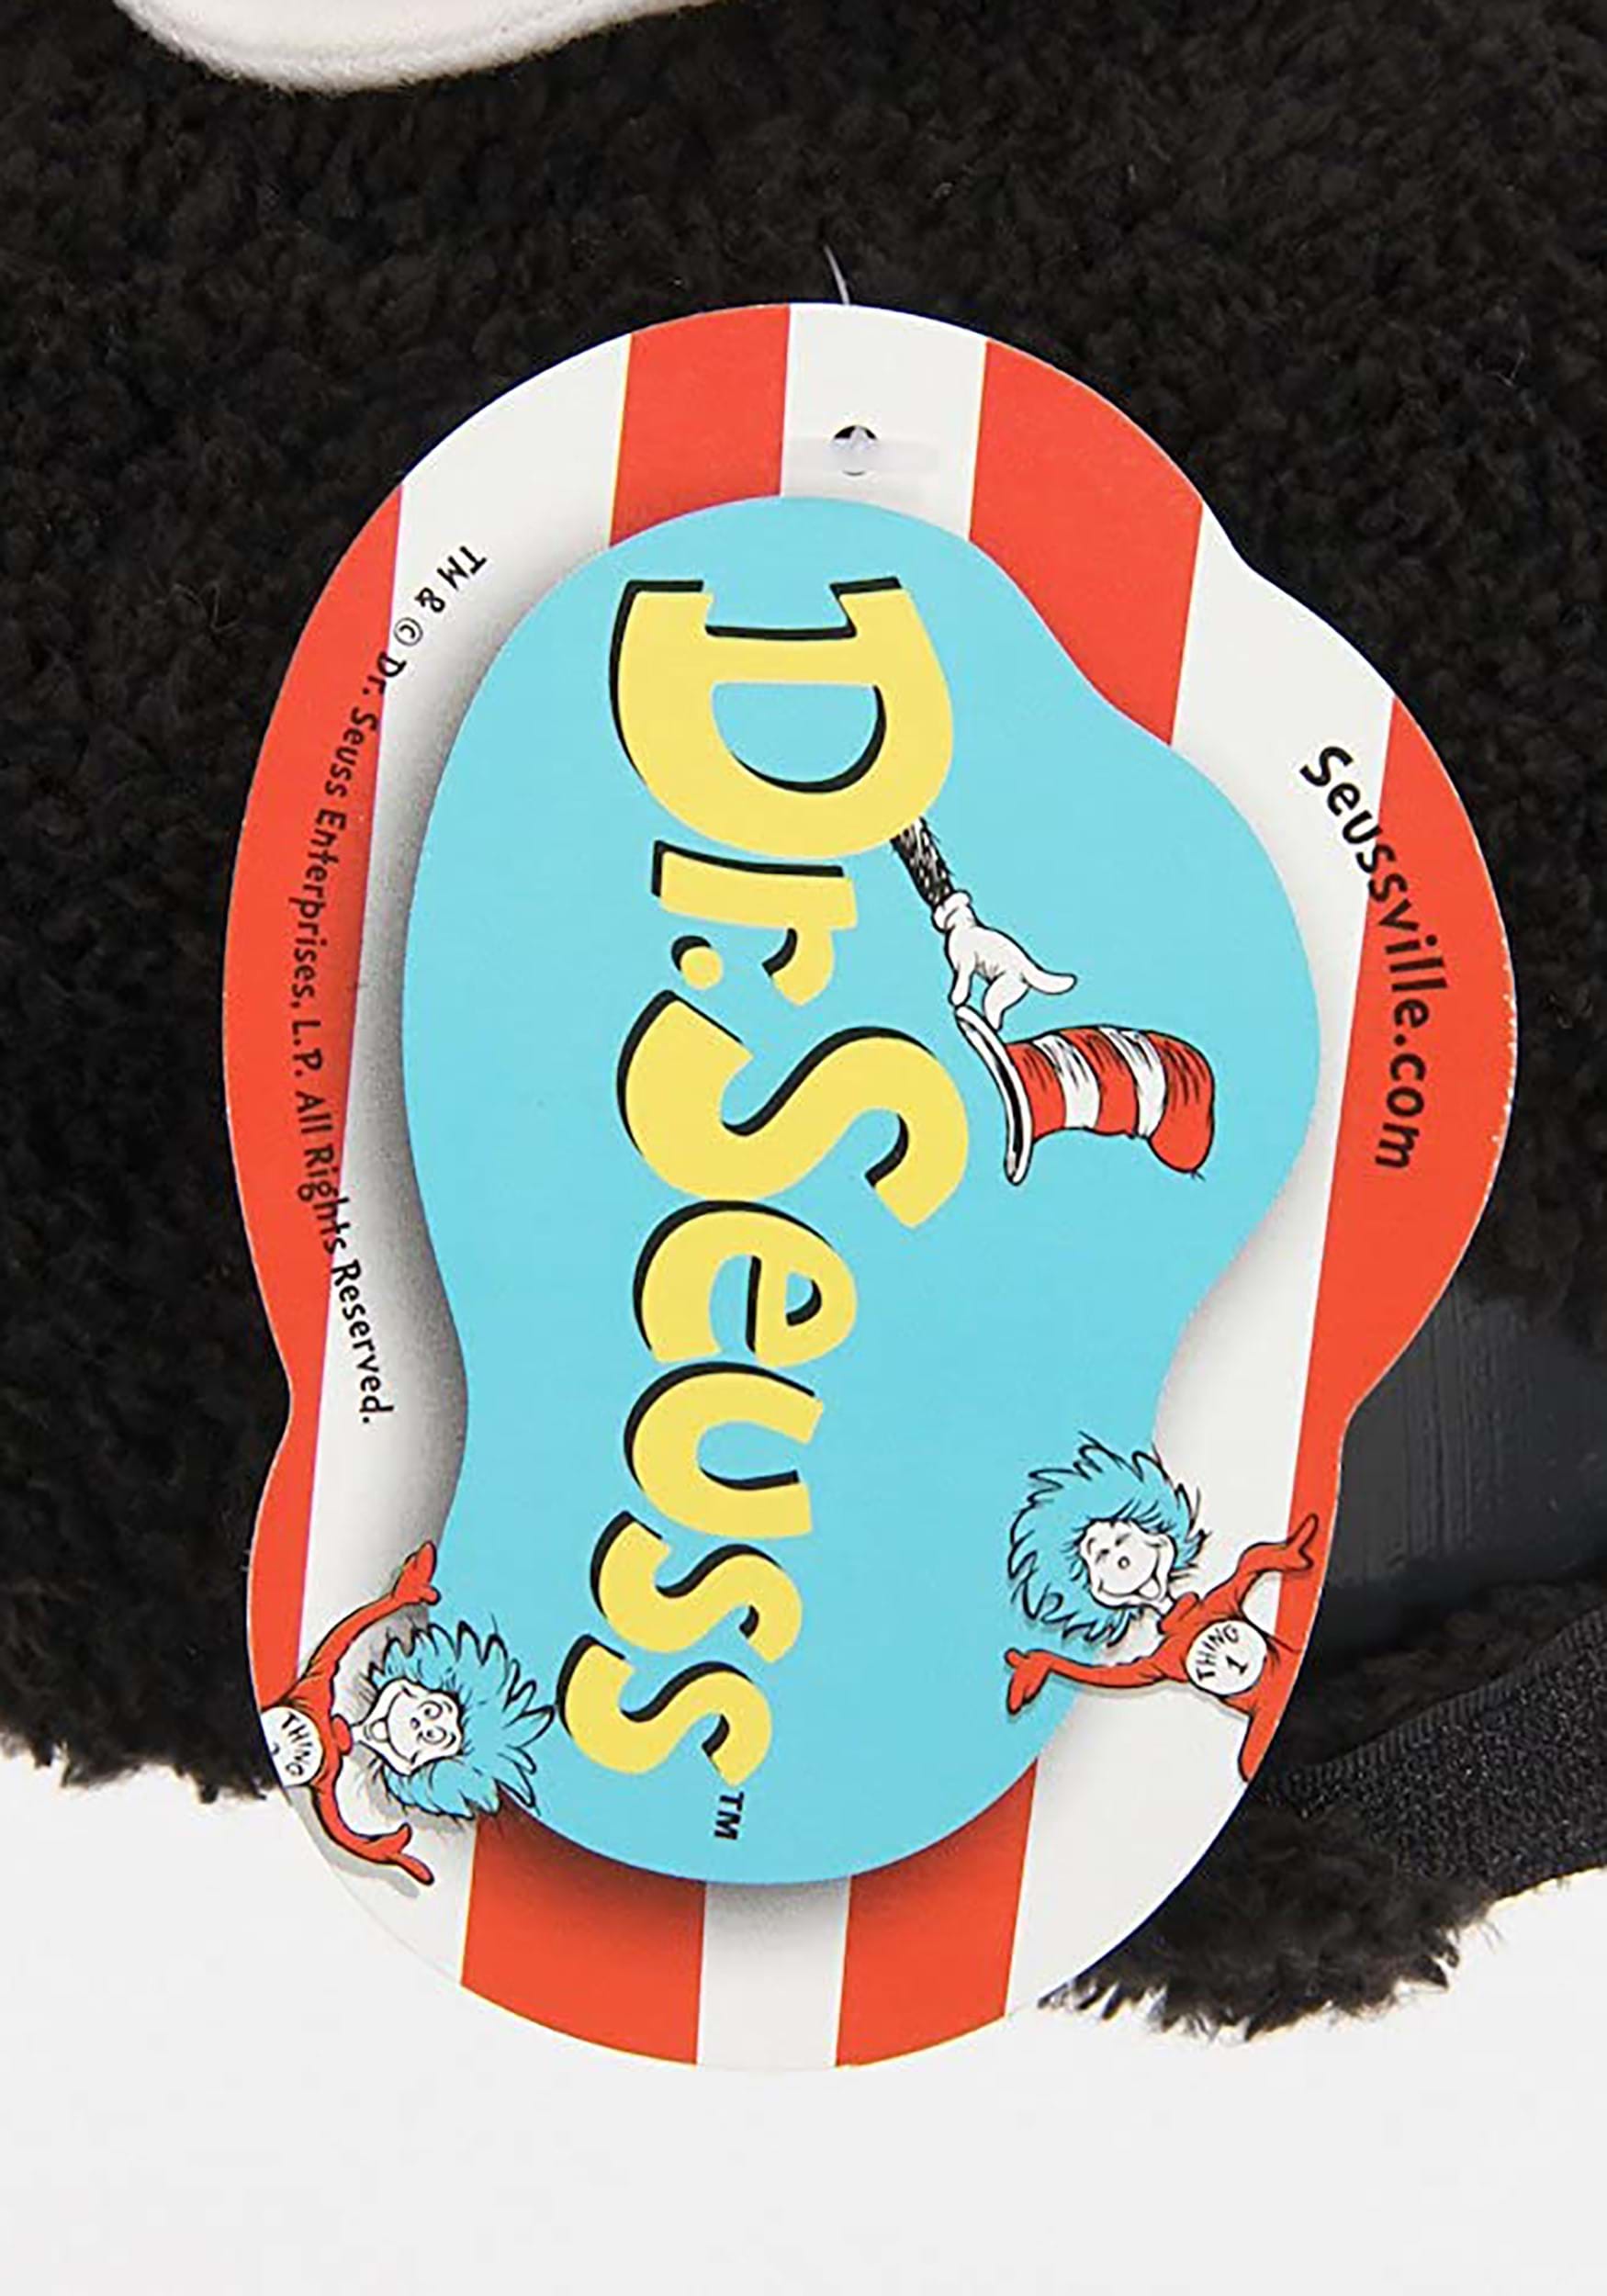 Dr. Seuss Cat In The Hat Fuzzy Cap For An Adult